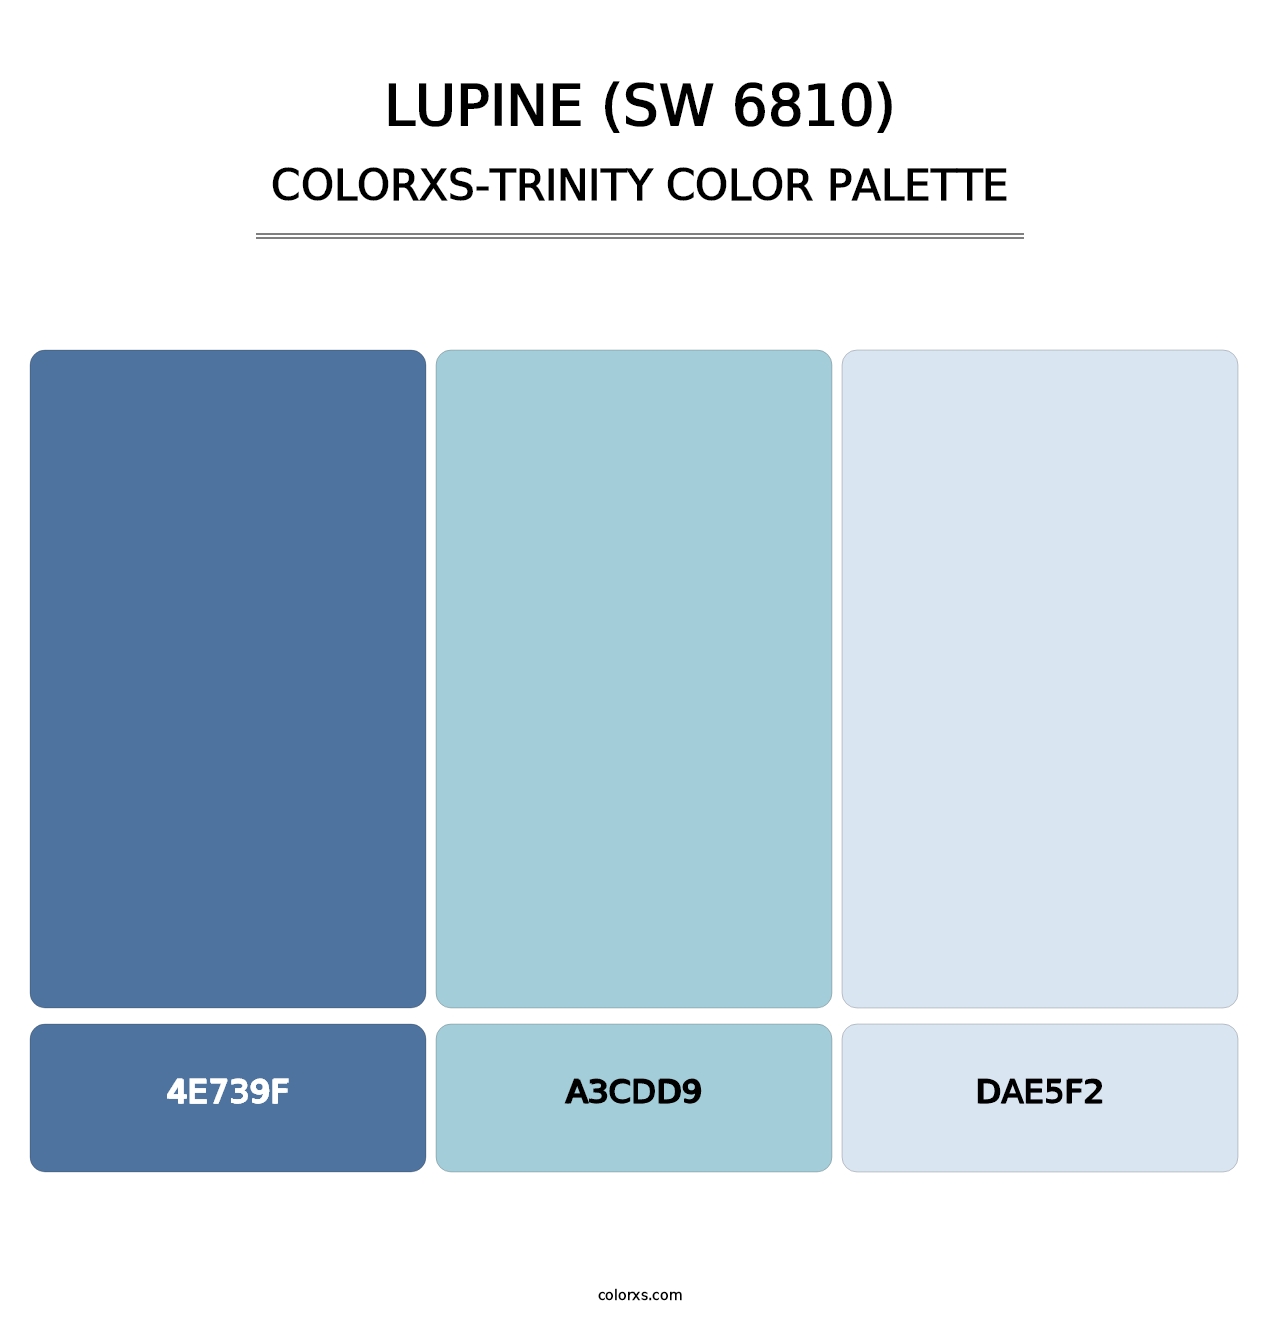 Lupine (SW 6810) - Colorxs Trinity Palette